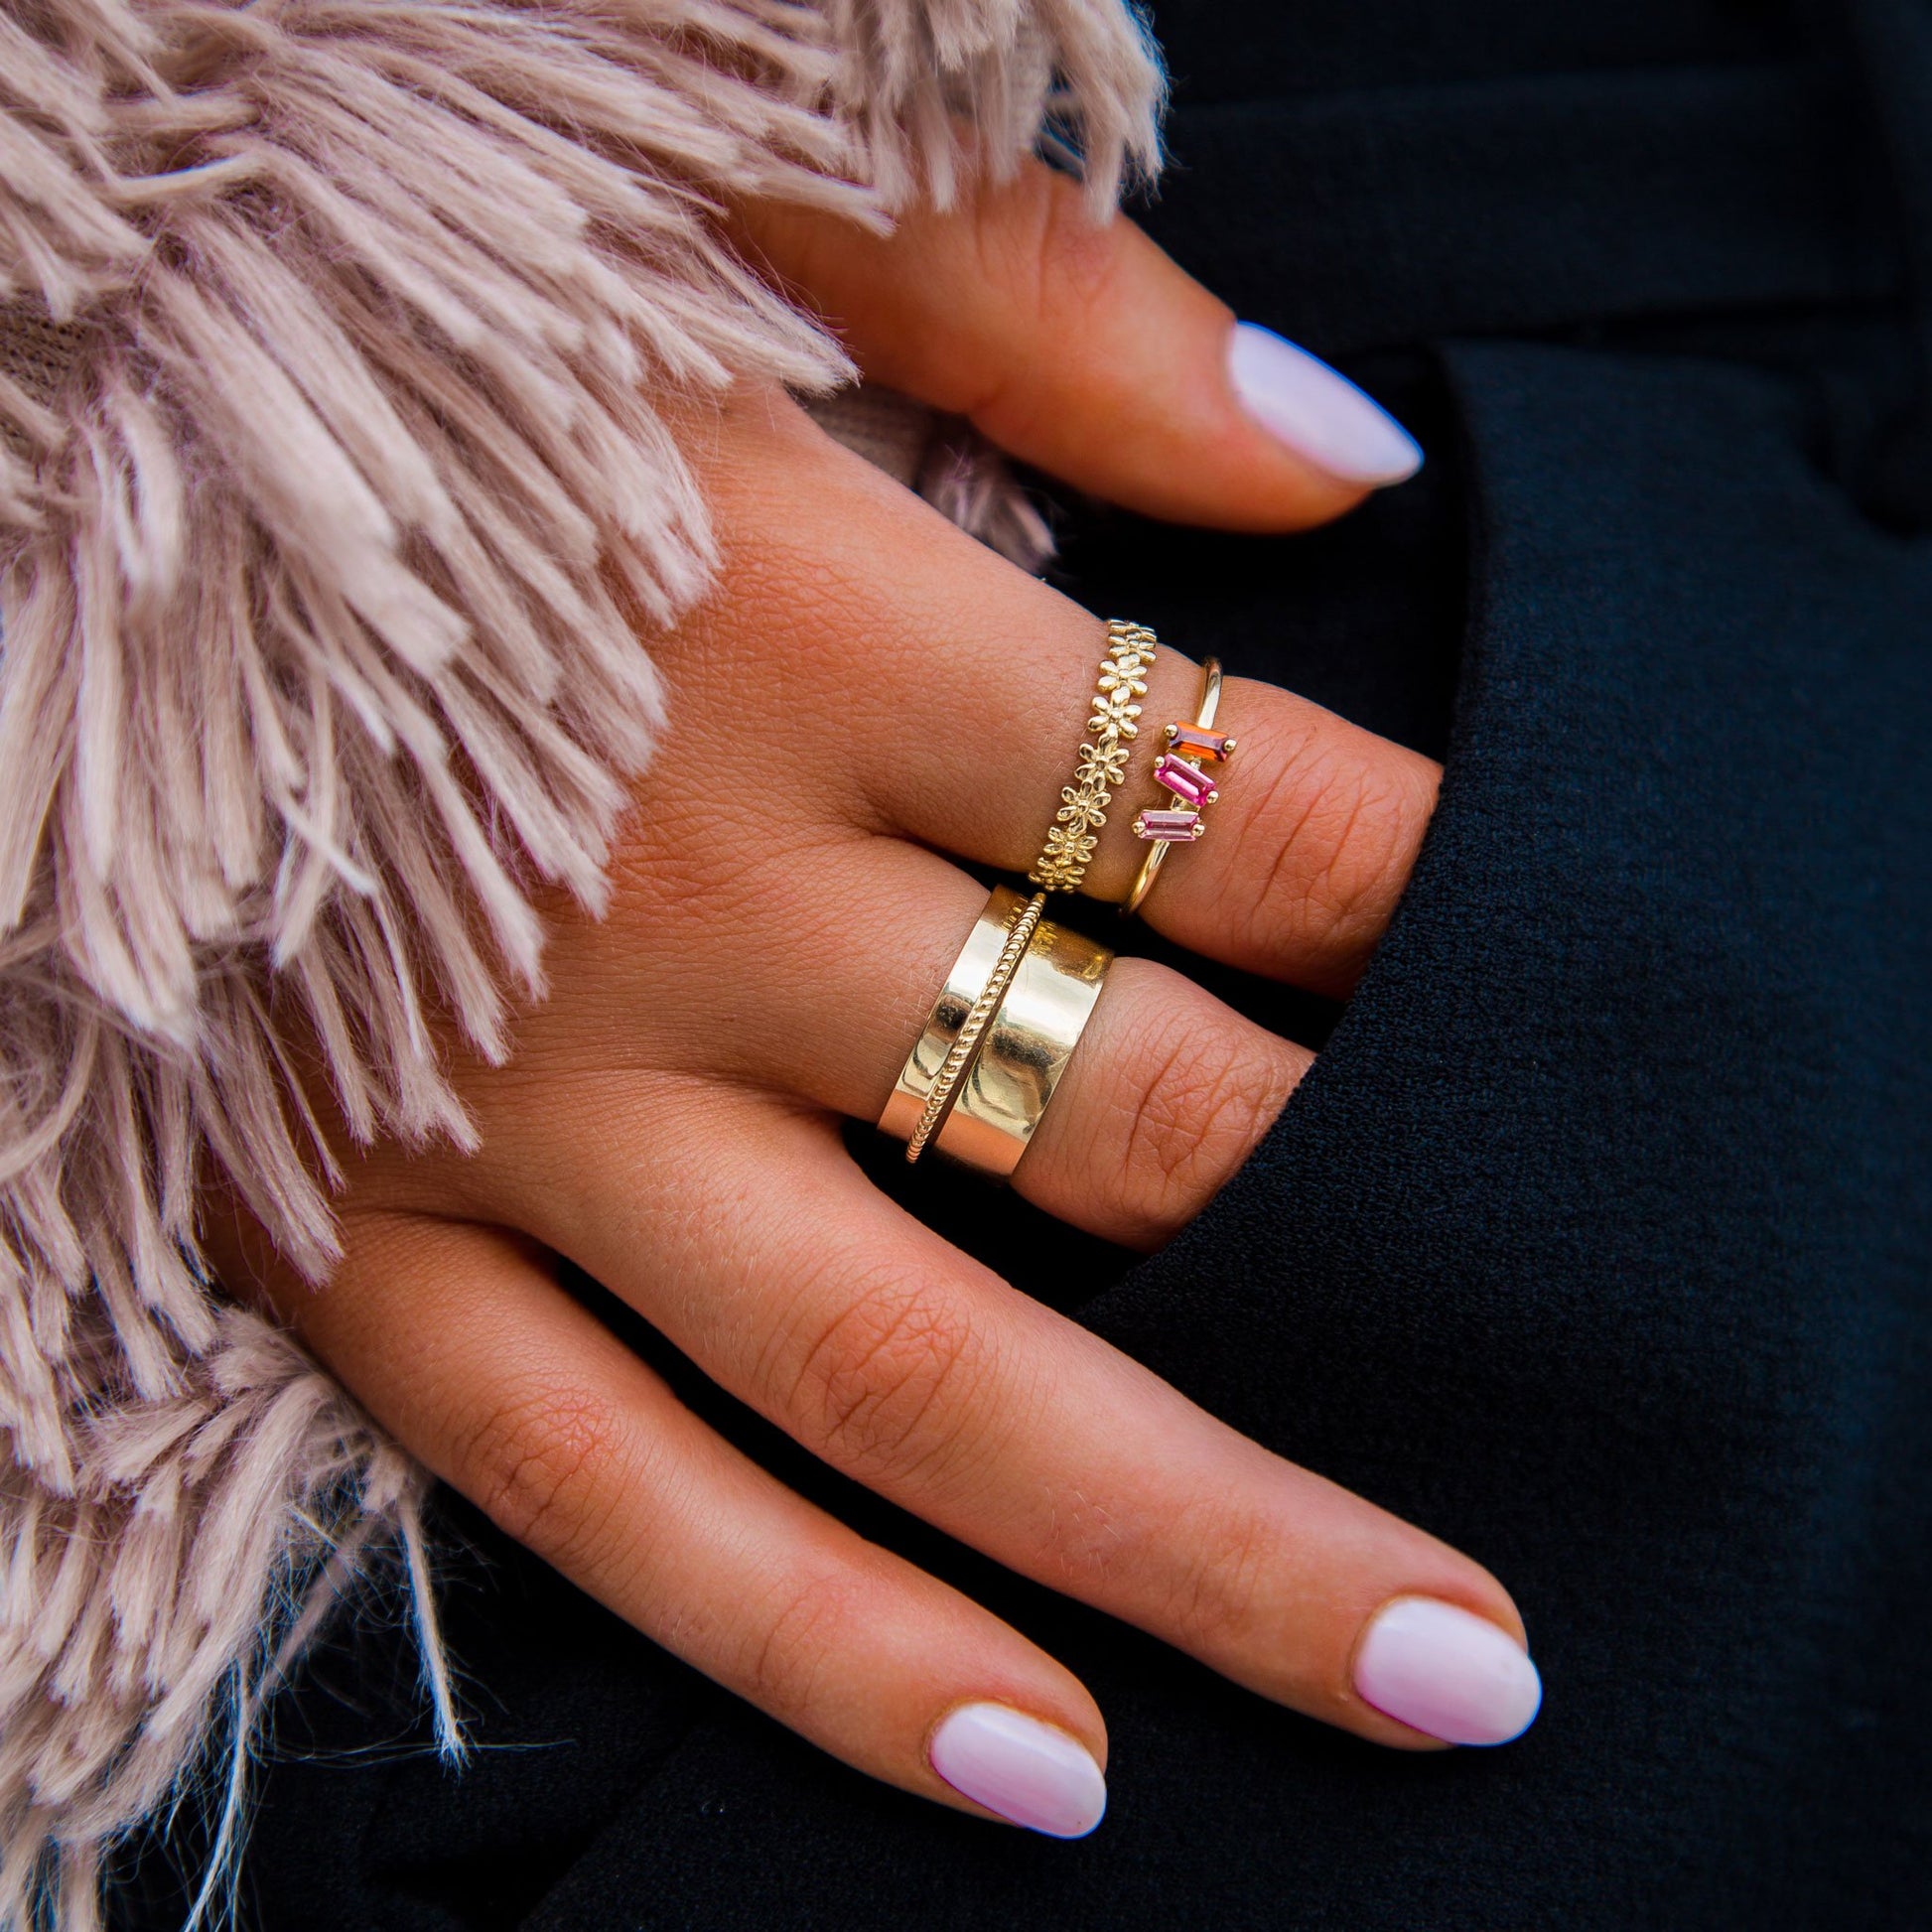 Solid gold stacking rings, stylish and trendy